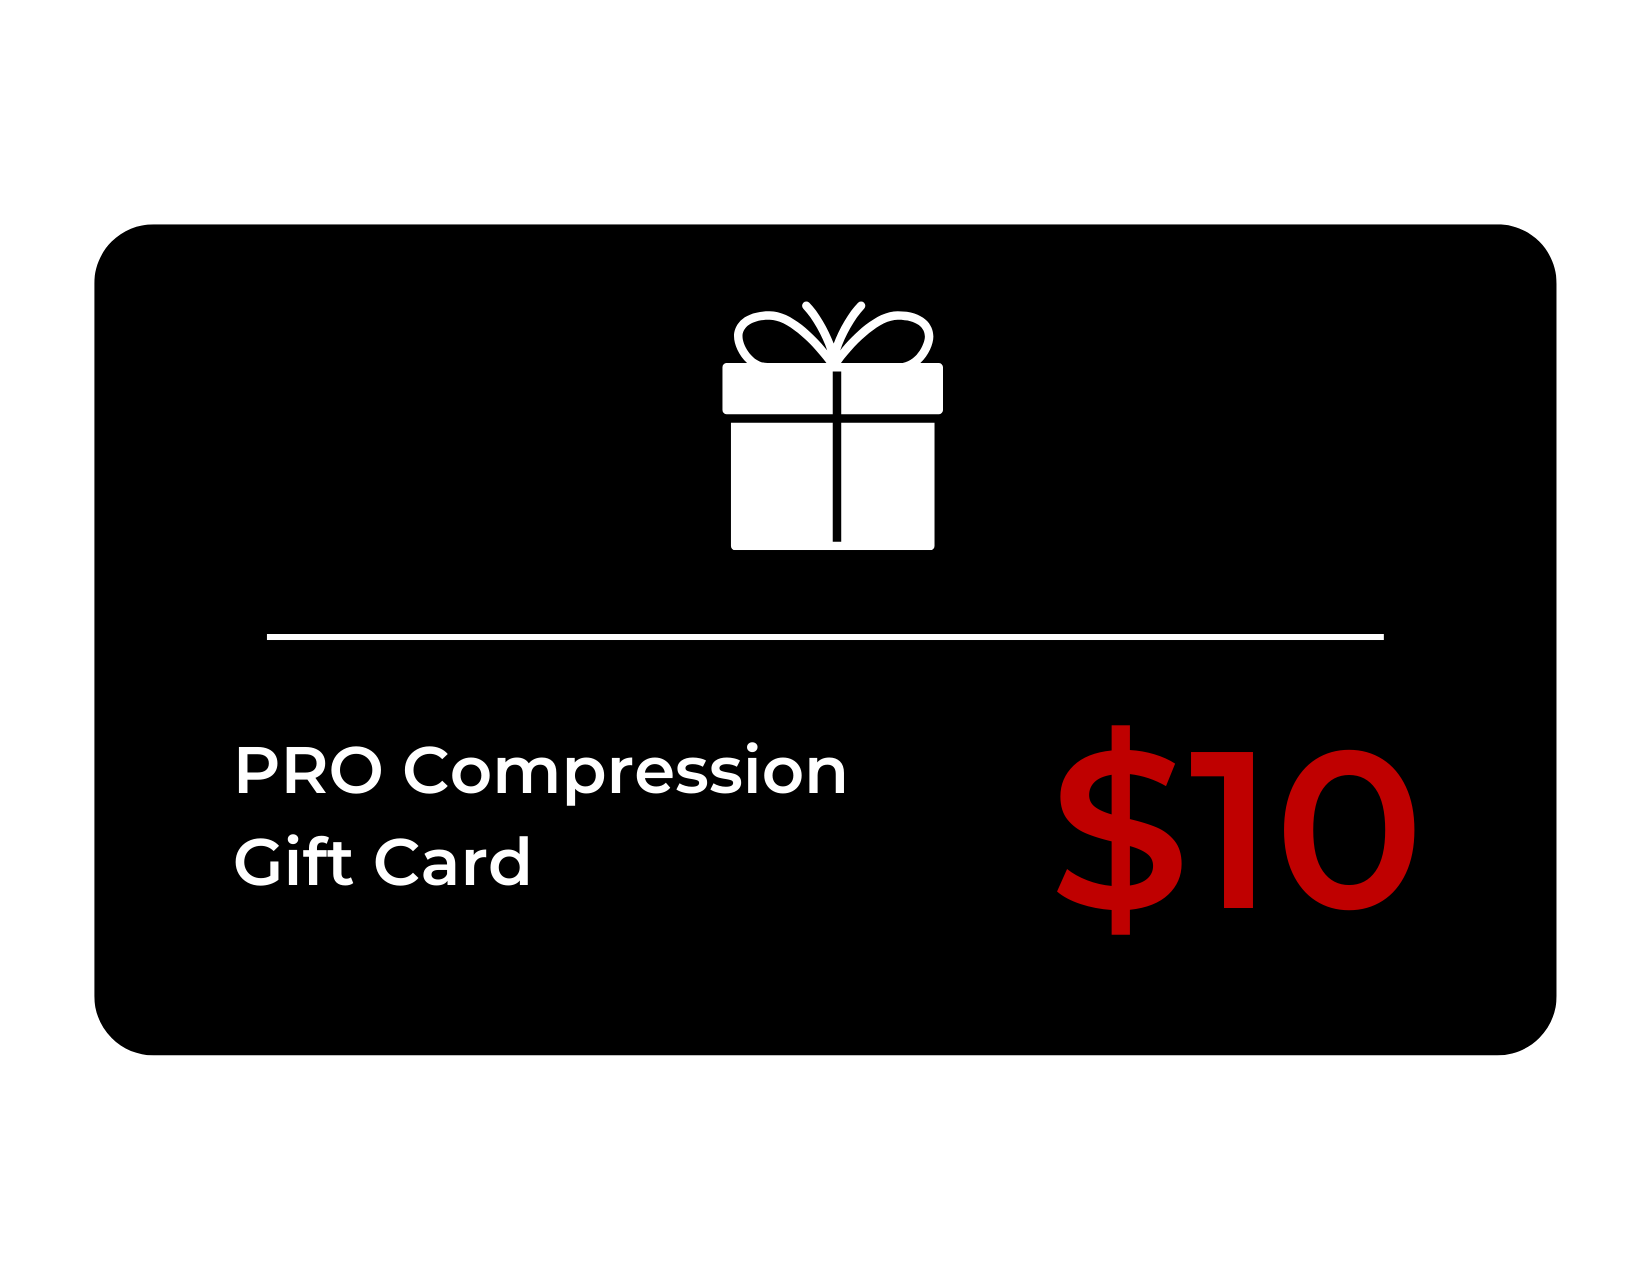 What Are the Pros and Cons of Gift Cards?